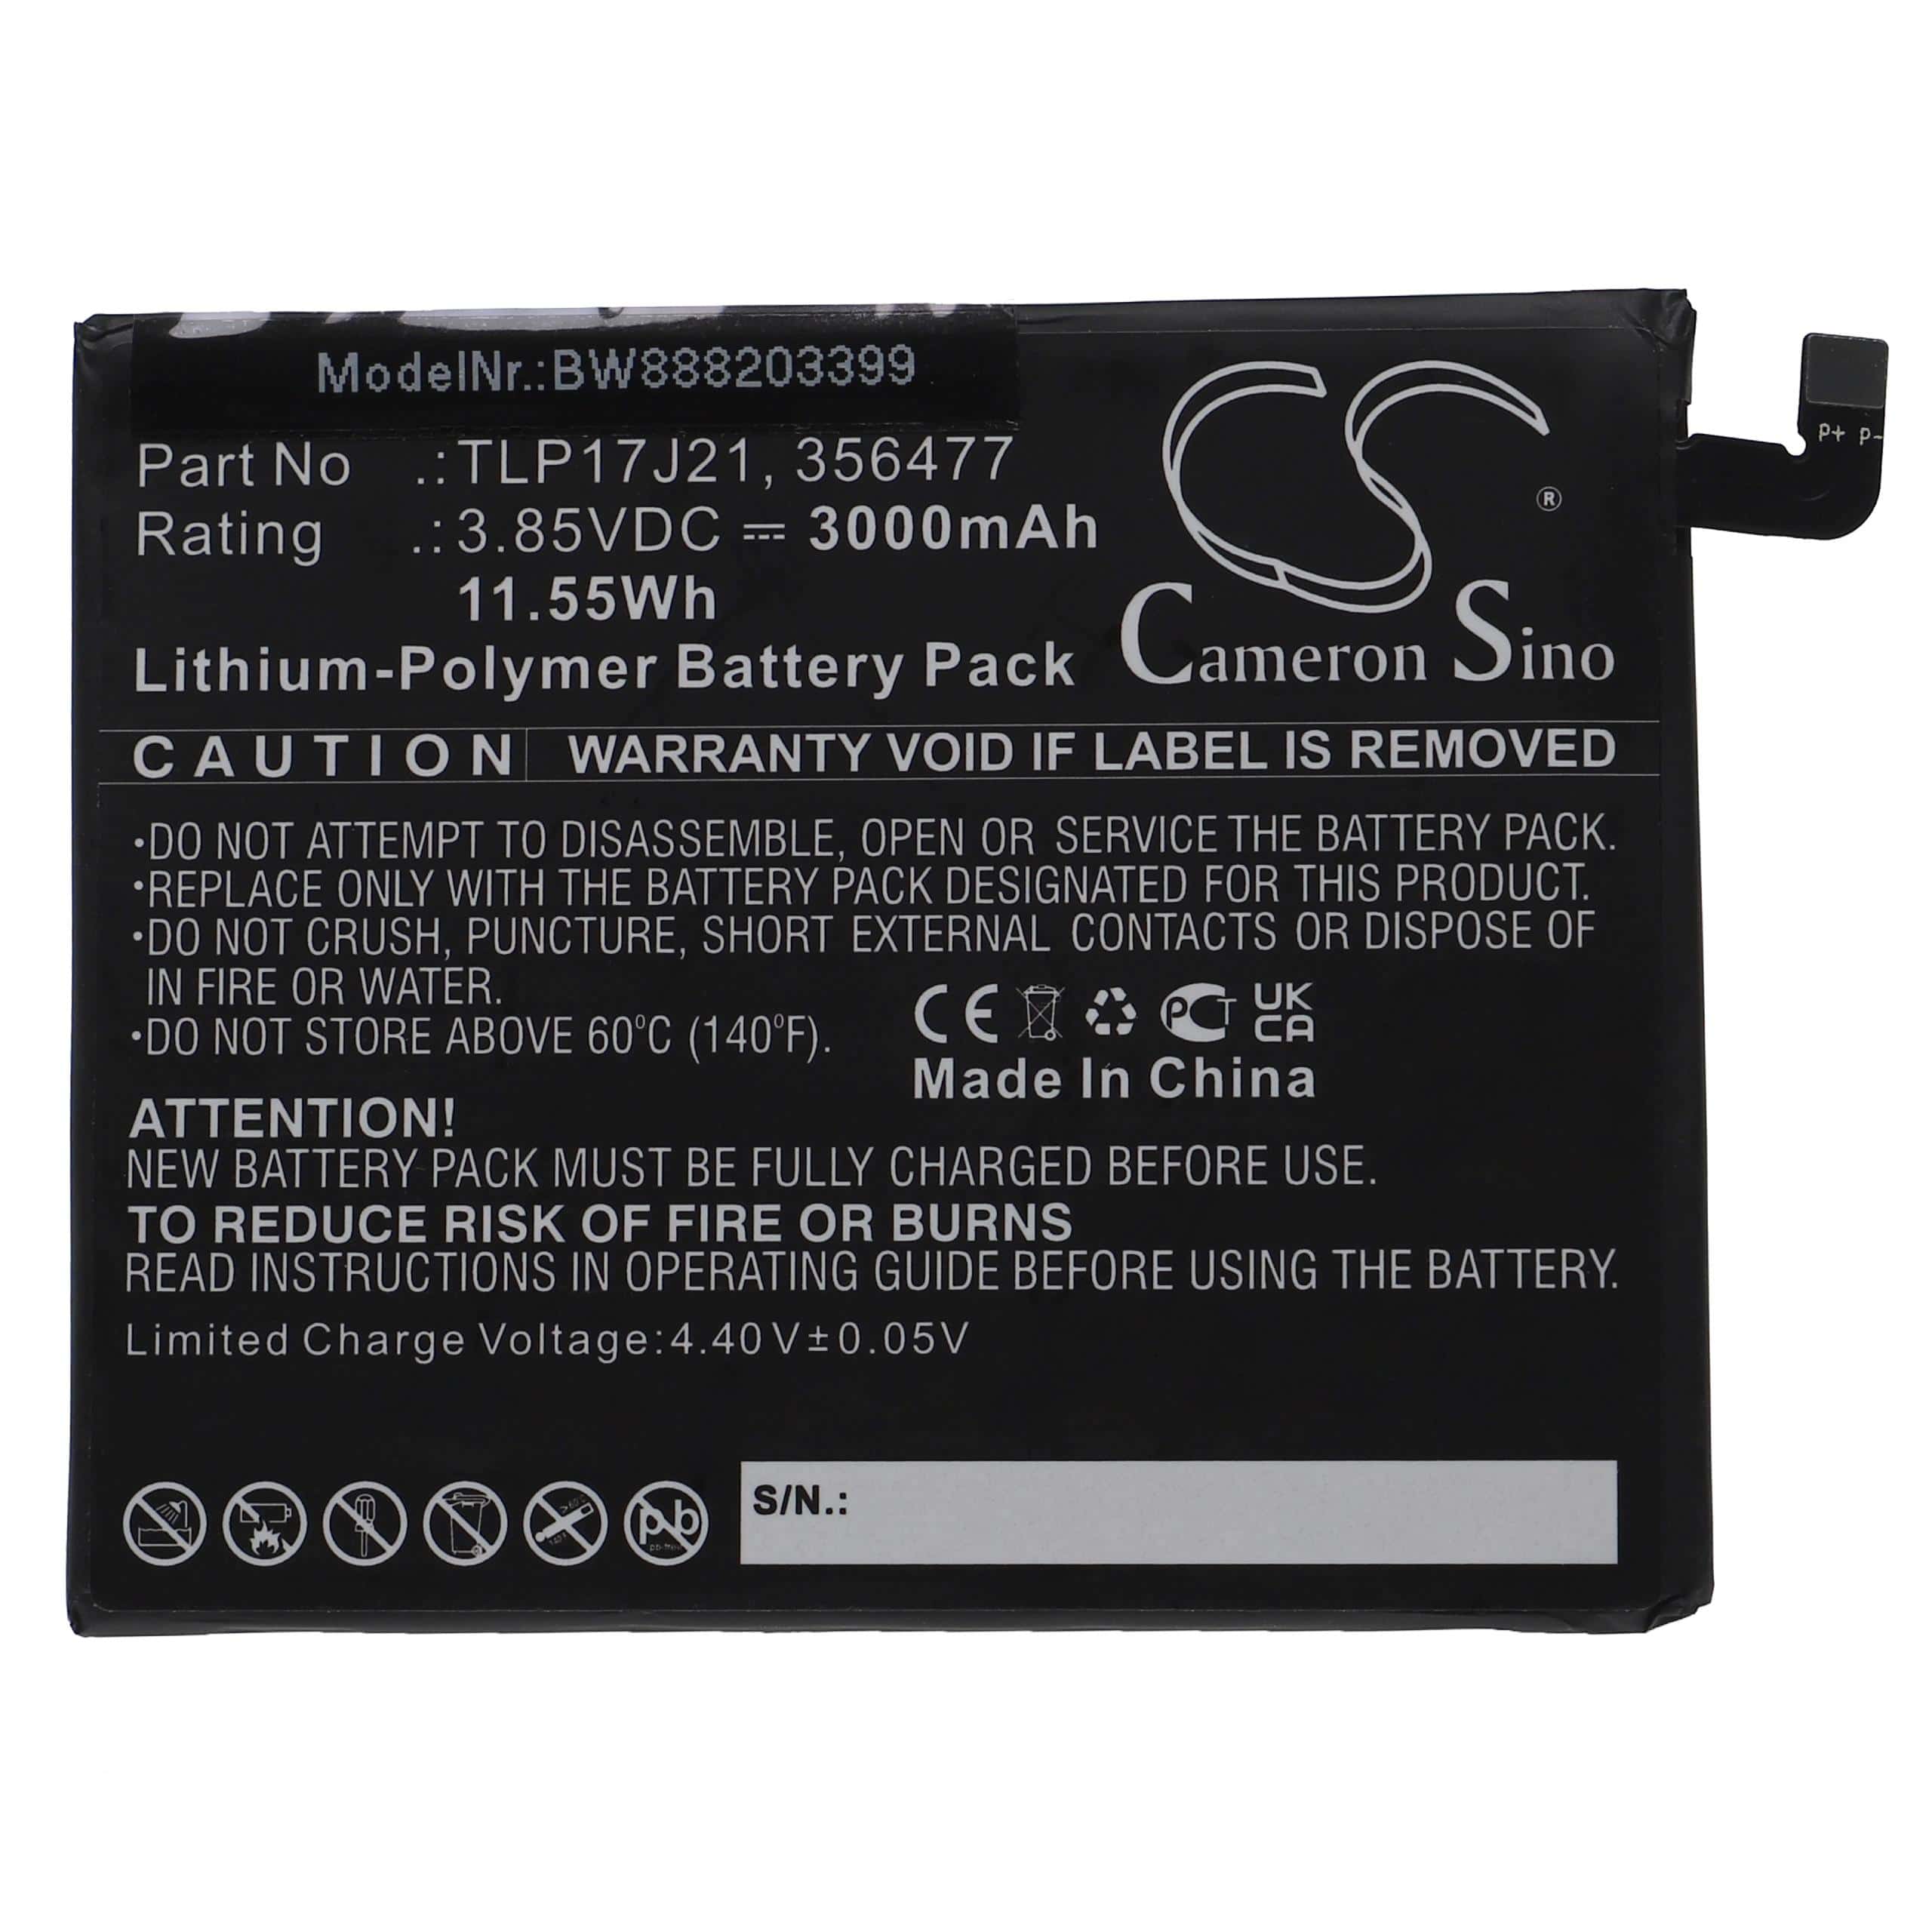 Mobile Phone Battery Replacement for Wiko TLP17J21, 356477 - 3000mAh 3.85V Li-polymer